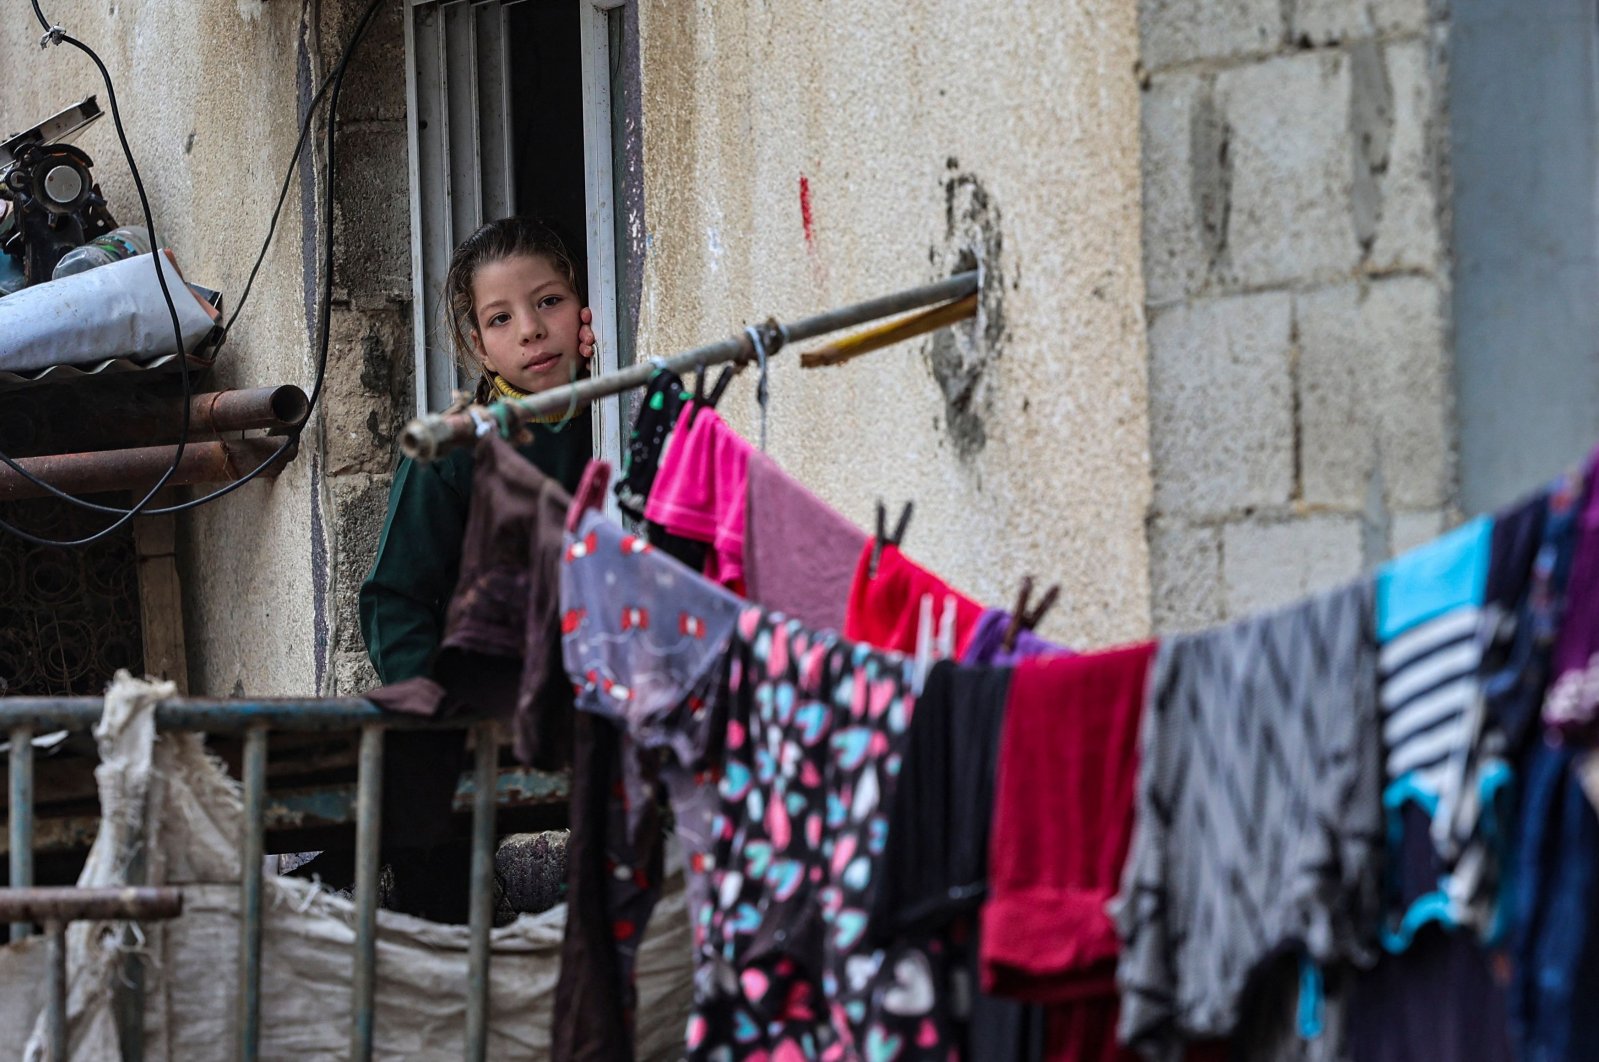 A young Palestinian girl is pictured as laundry hangs to dry at her home in Beit Lahia in the northern Gaza Strip, on Dec. 23, 2021. (AFP)